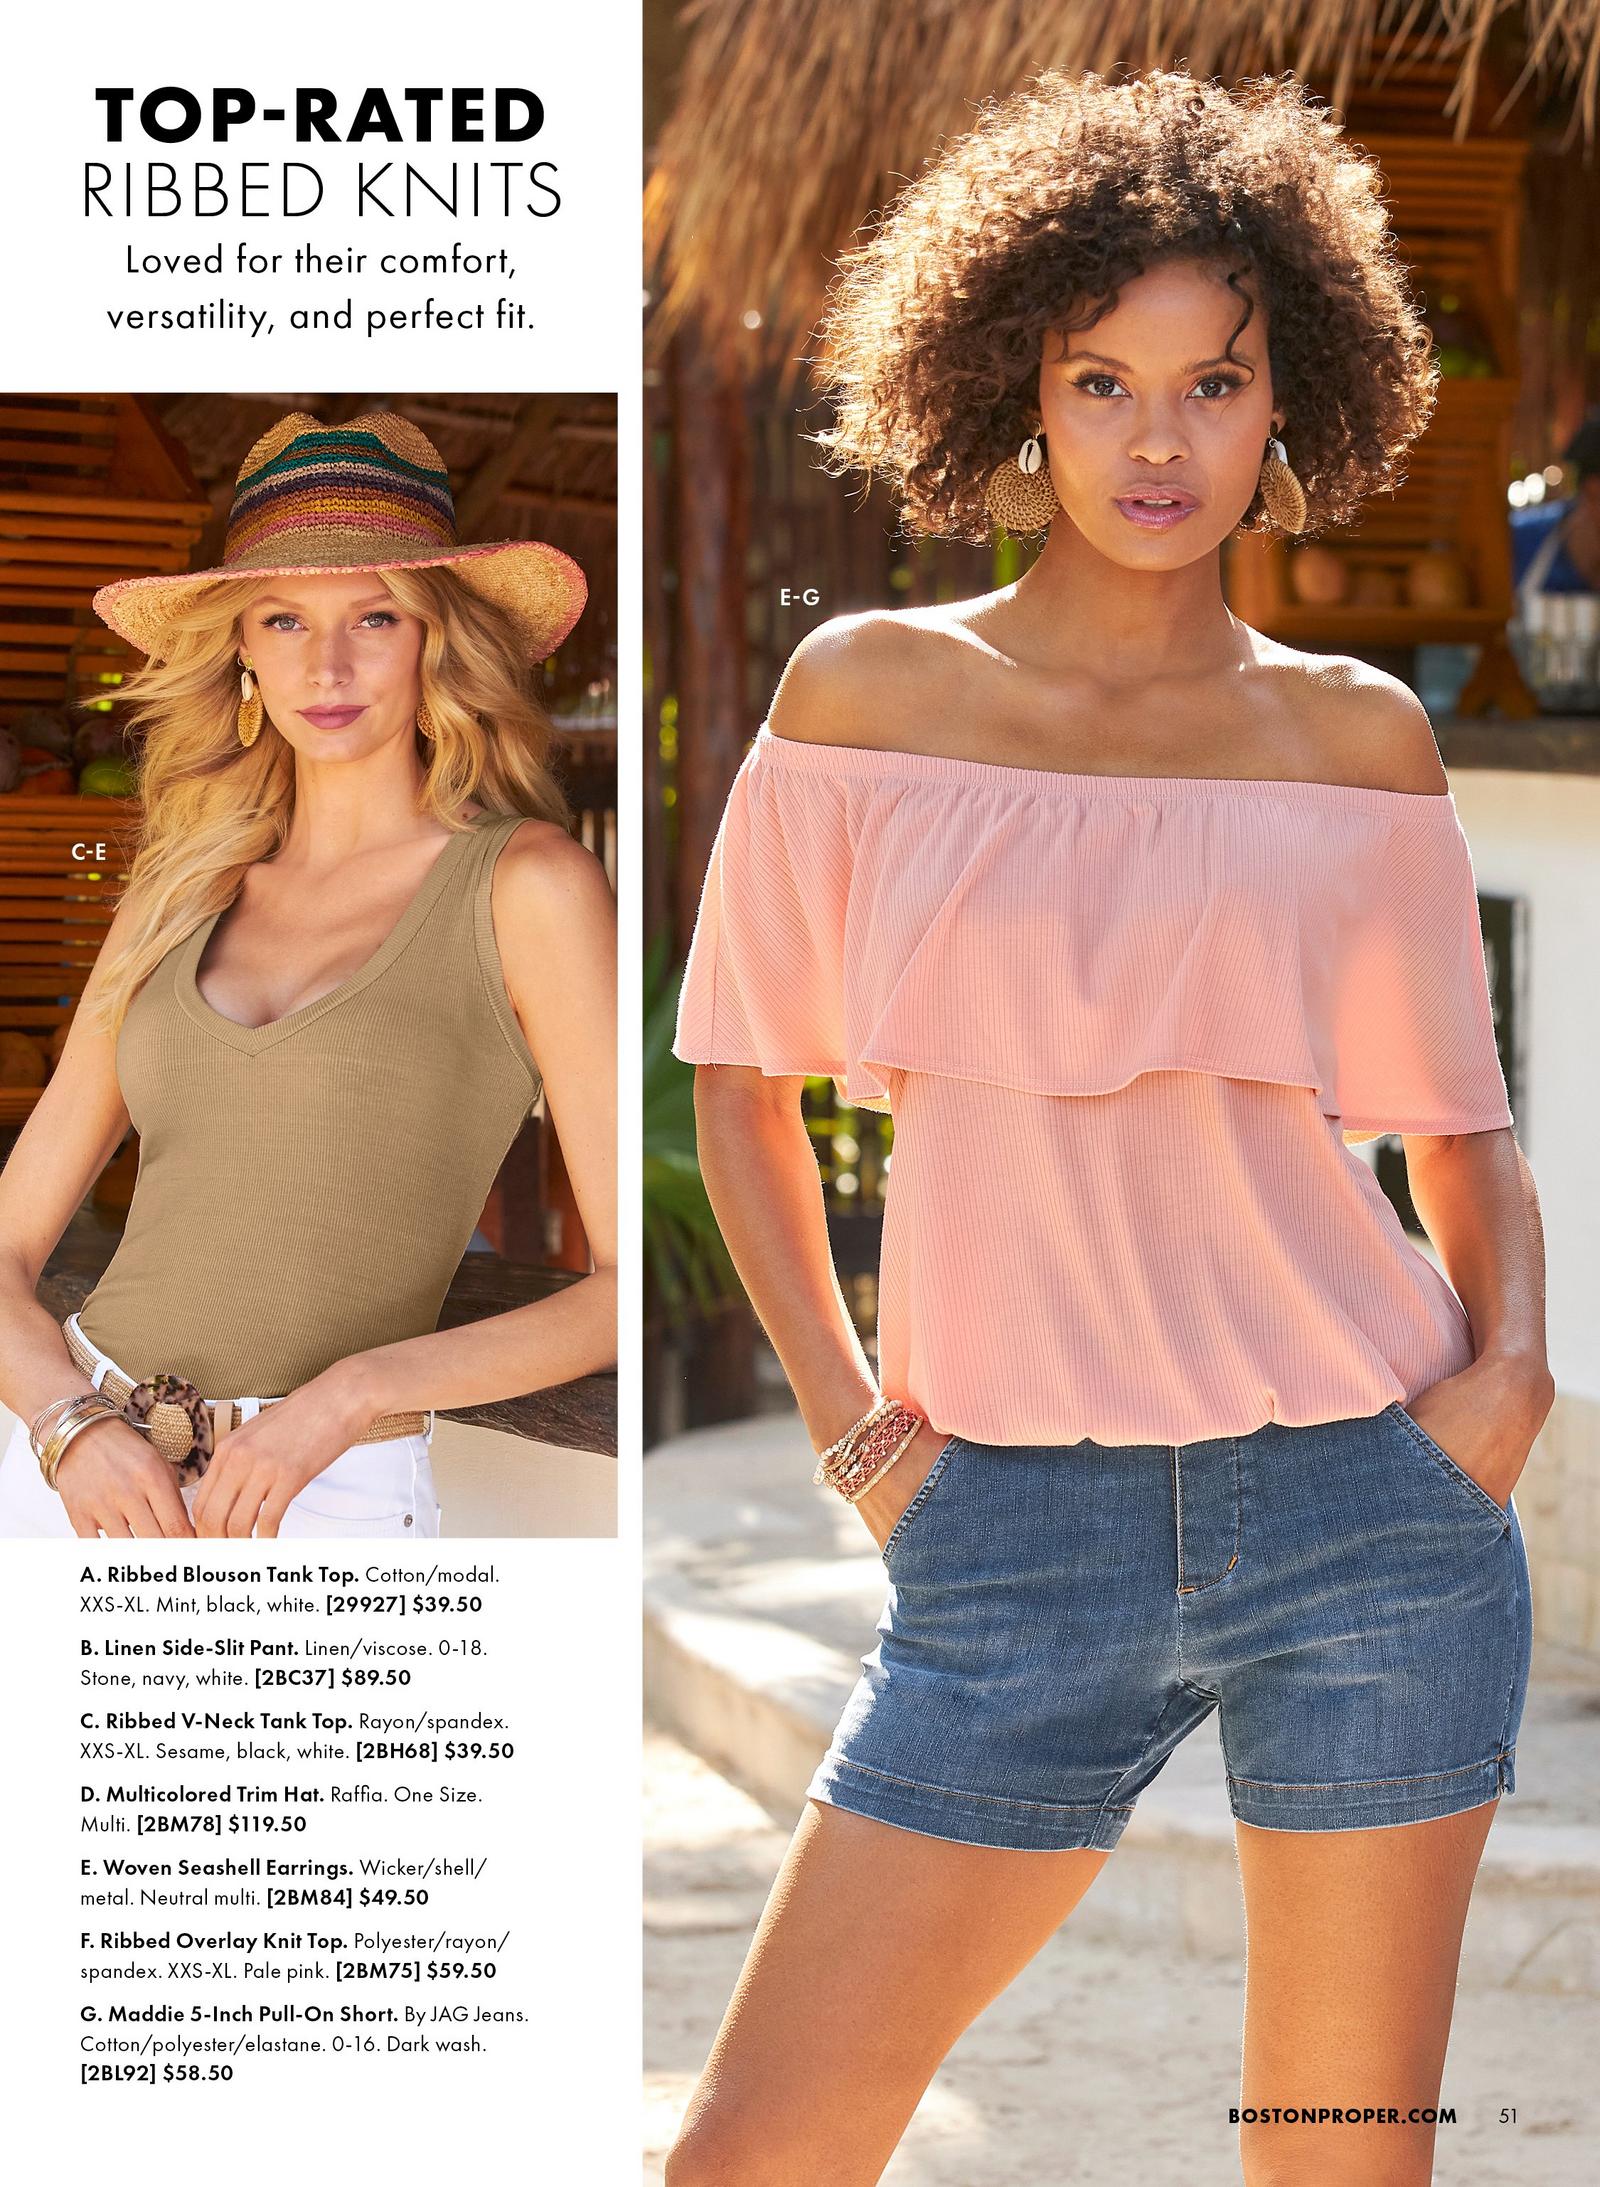 One model is shown wearing the Multicolor Trim Hat in a woven muted striped rainbow and light tan color, the Woven Seashell Earrings in woven light tan and the Ribbed V-Neck Tank Top in light brown while another model is shown wearing the Ribbed Overlay Knit Top in light pink, the Maddie 5- Inch Pull On Shorts and the Woven Seashell Earrings in a woven tan.